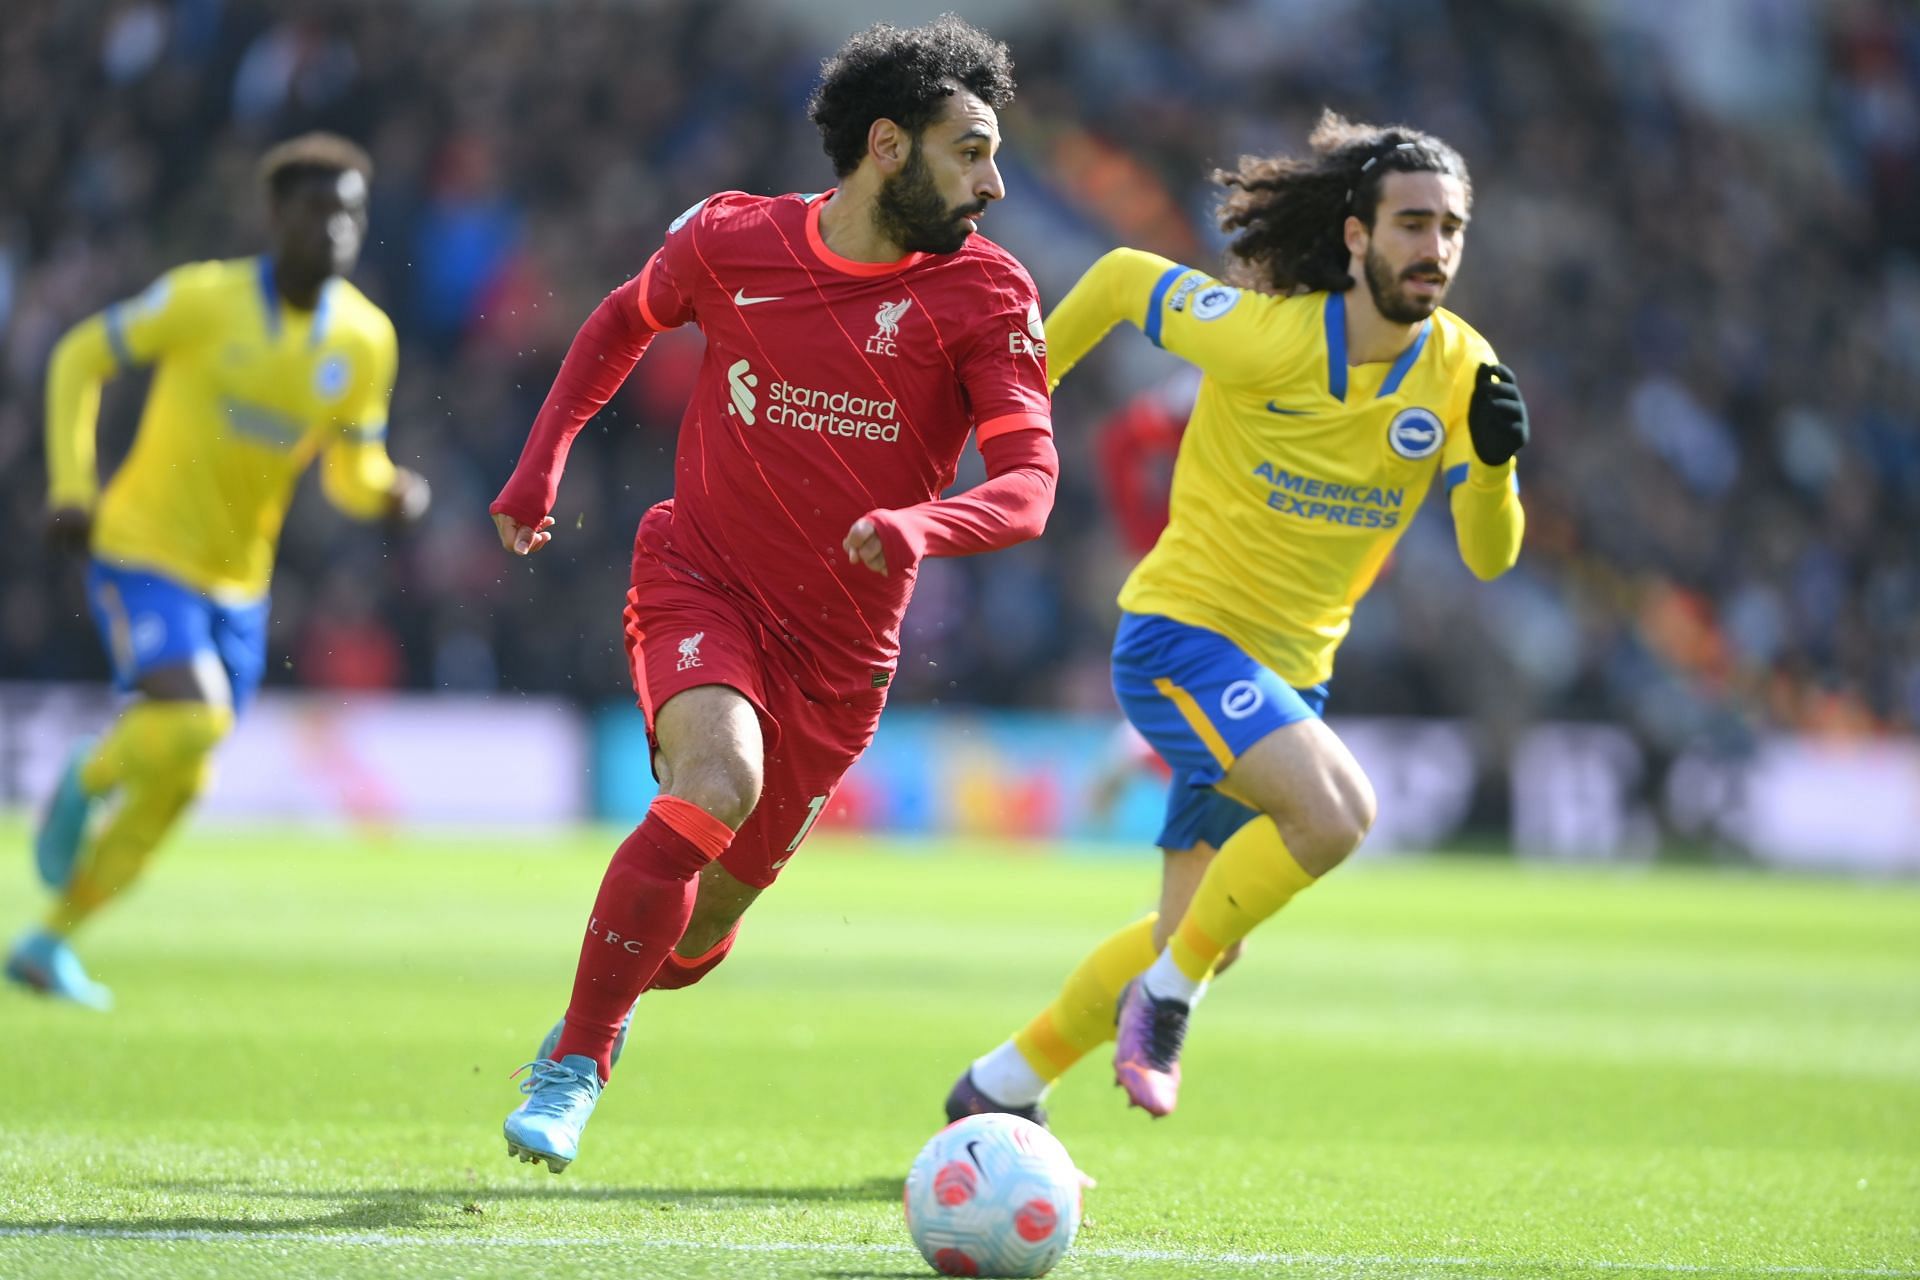 Mohamed Salah had a great game